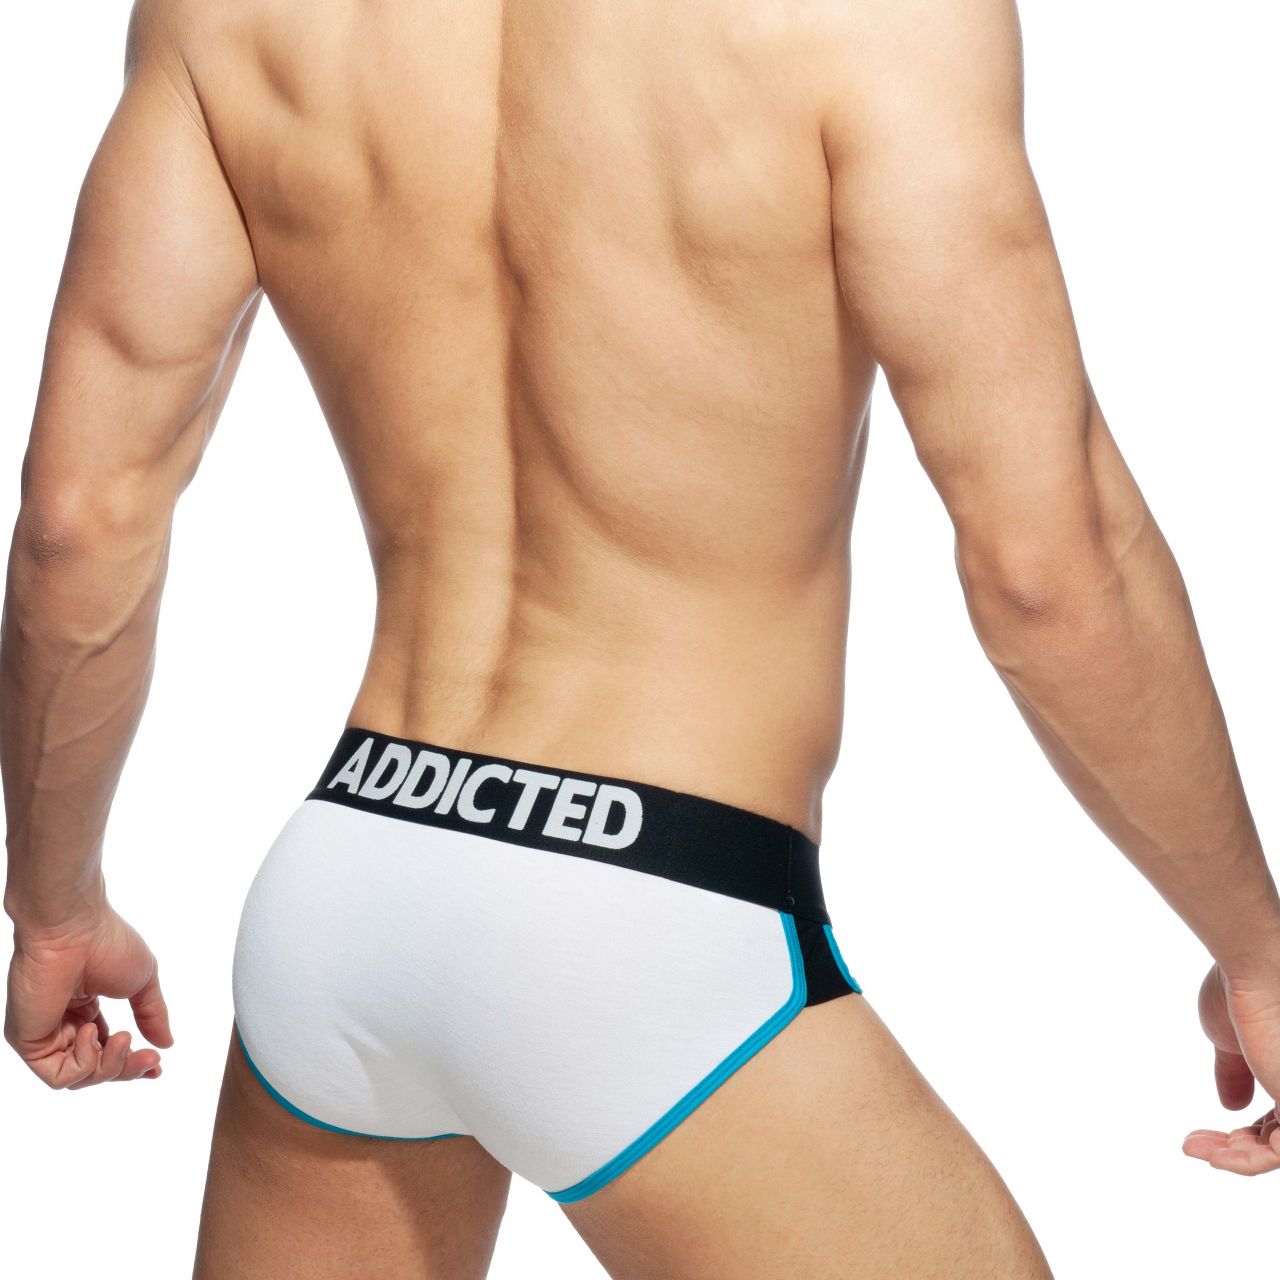 Addicted 3 Pack Briefs SECOND SKIN 3 PACK BRIEF, AD897P, white/royal blue/navy blue